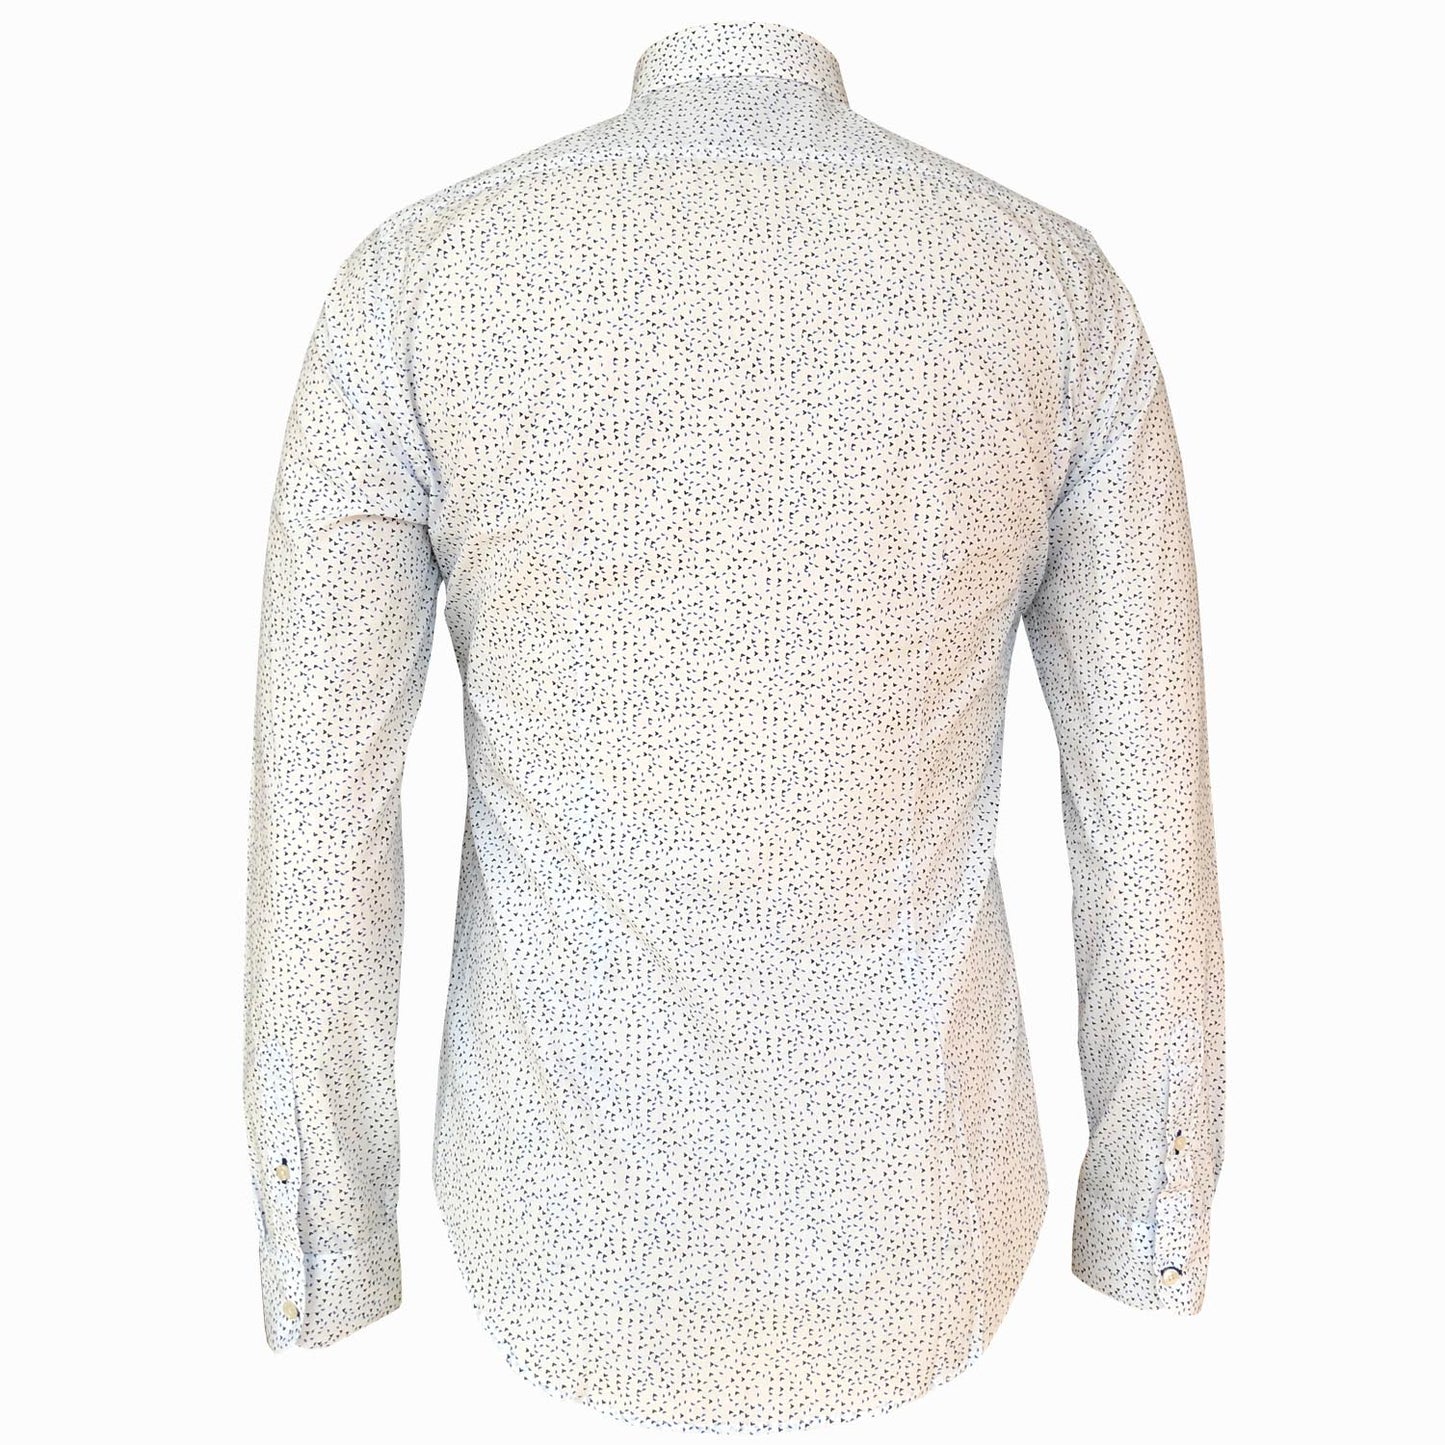 LUXE HOMME SELECT - Premium Oxford Long Sleeve Shirt (Mitchell) - LabelledUp.com